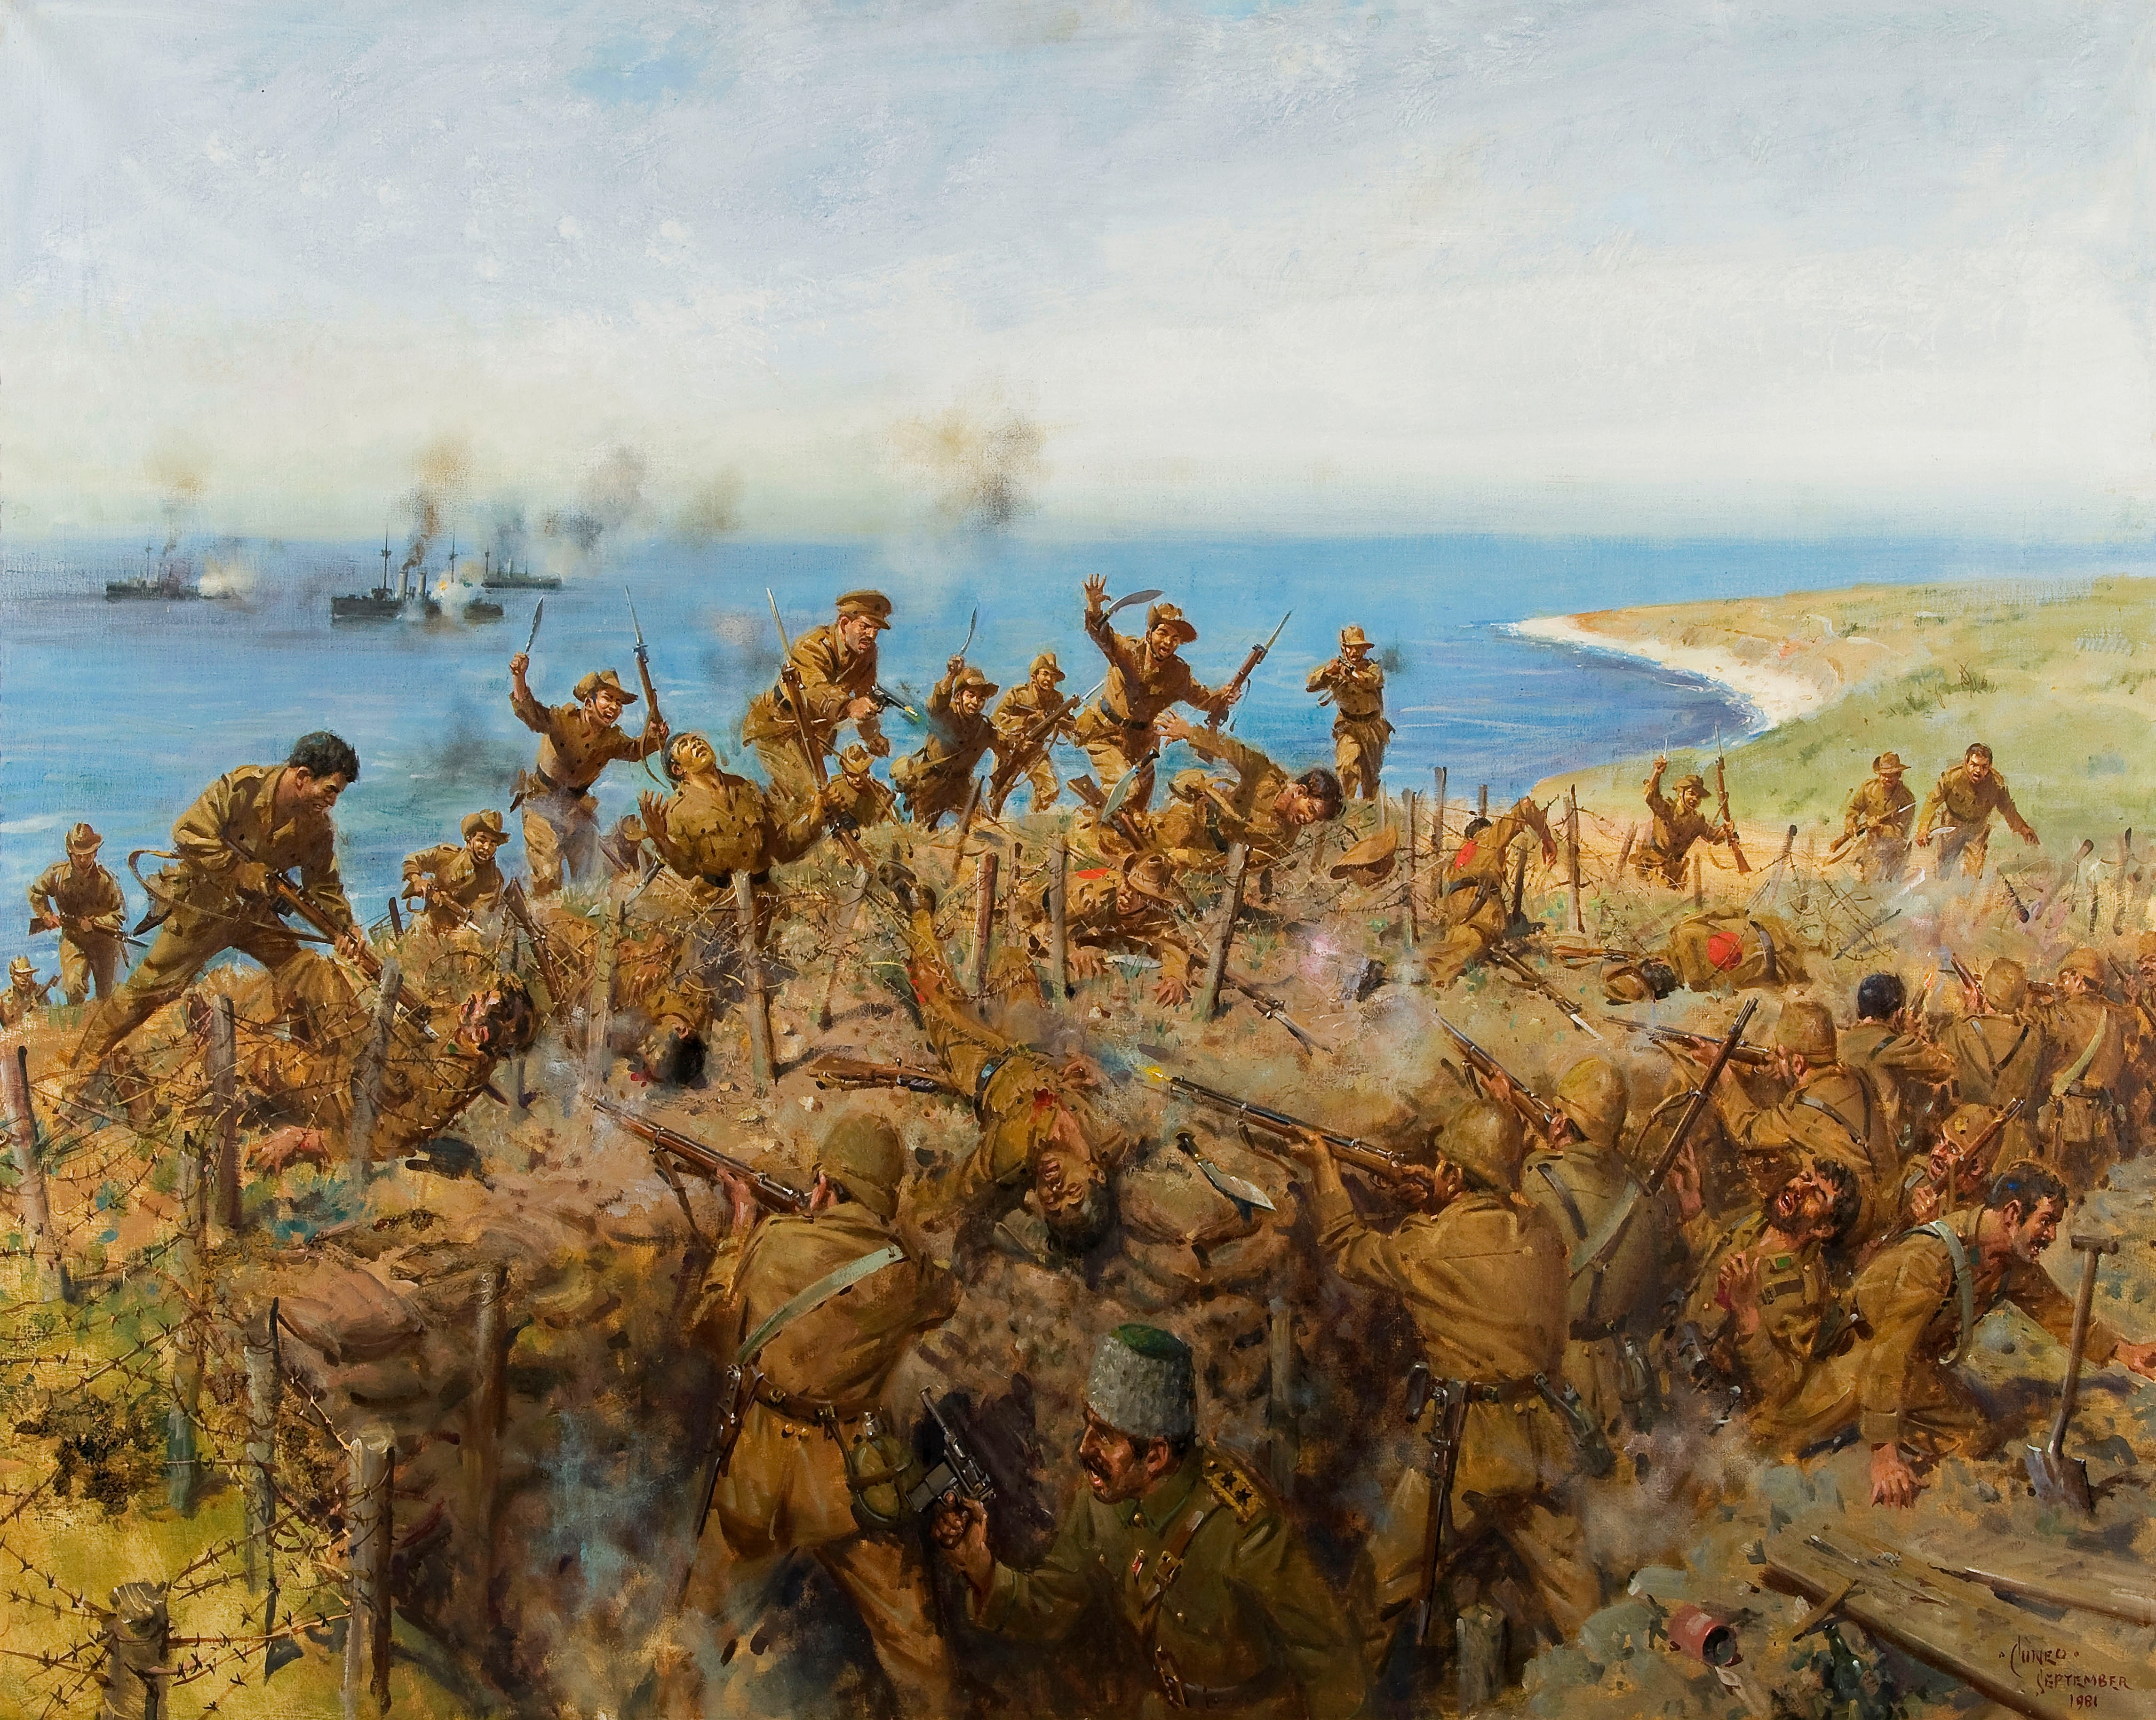 Ww1 Artist Terence Cuneo Painting Oil On S Wallpaper Photos